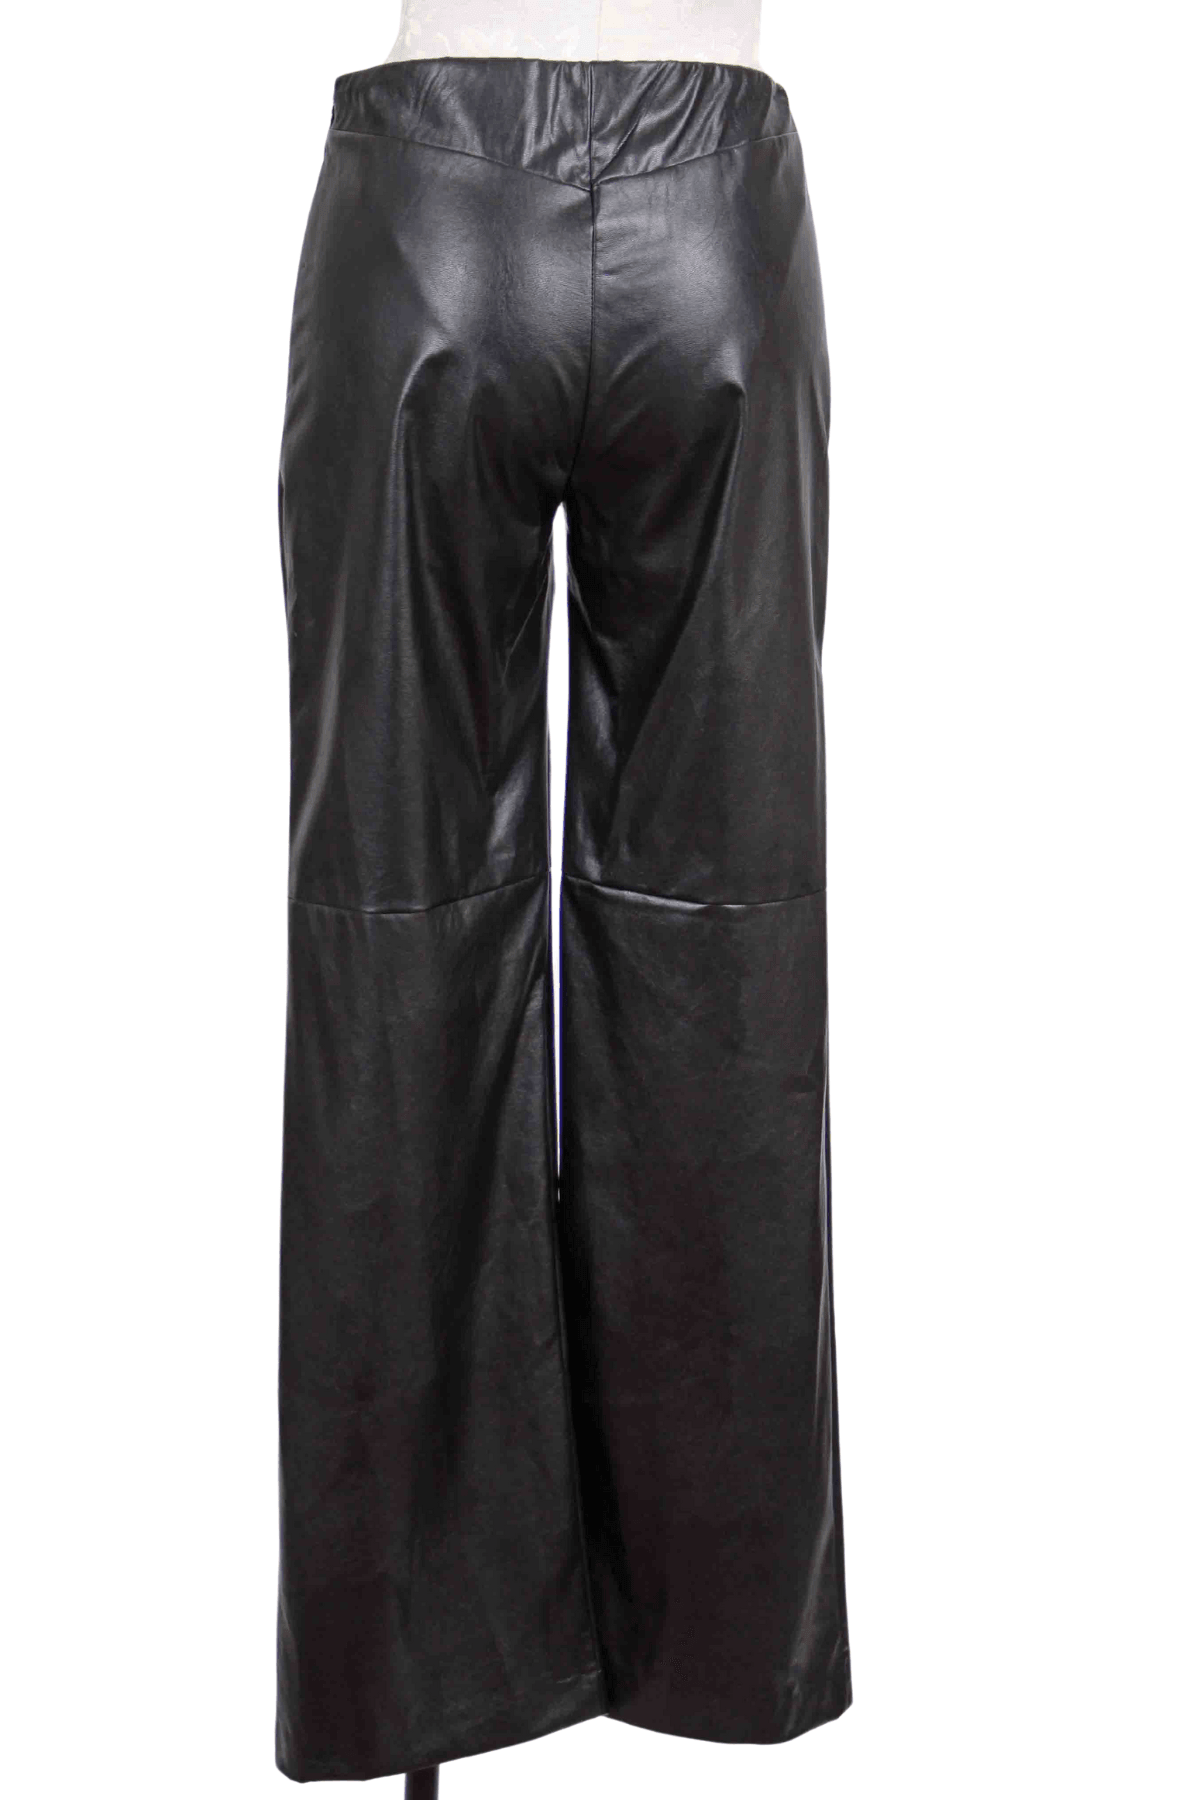 back view of Faux Leather Pants with Front Pockets by Fifteen Twenty